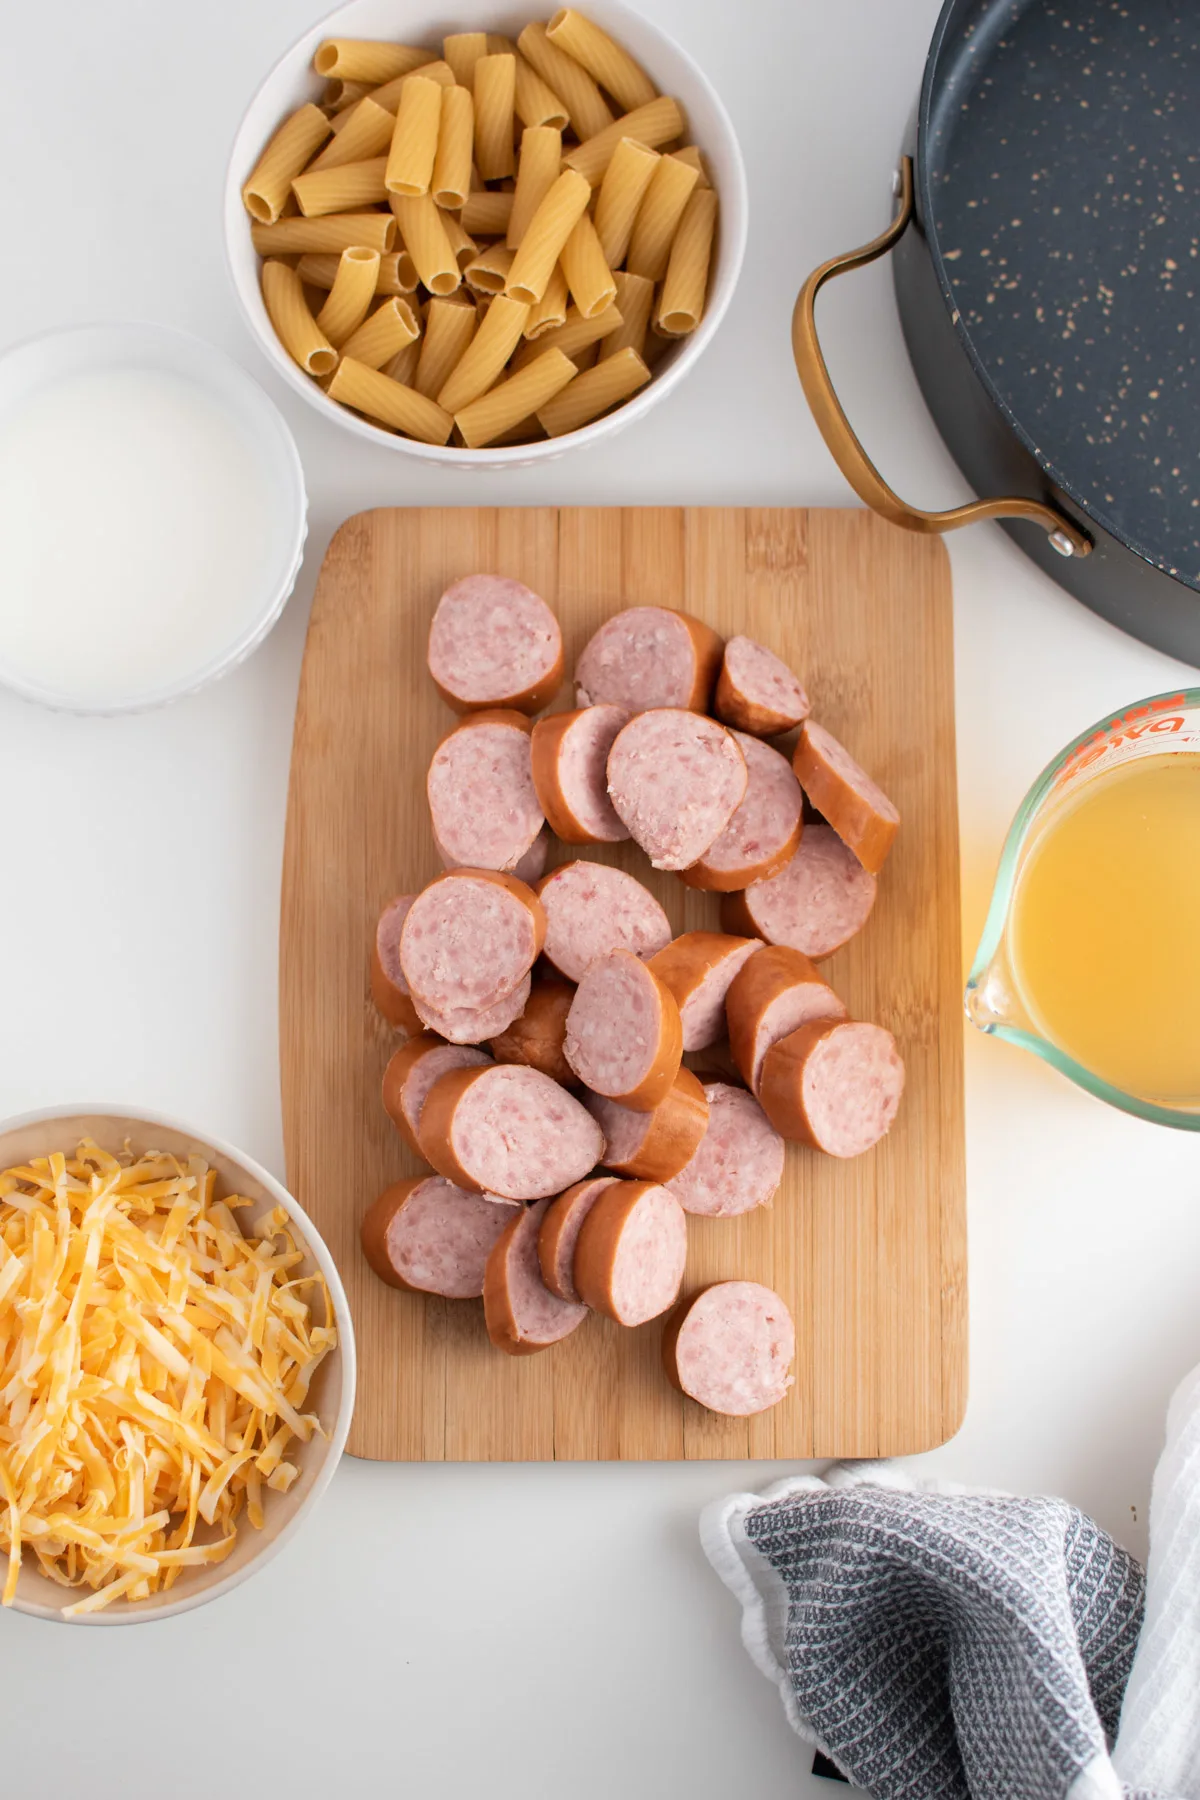 Kielbasa pasta ingredients including shredded cheese, milk, broth and sausage on white table.